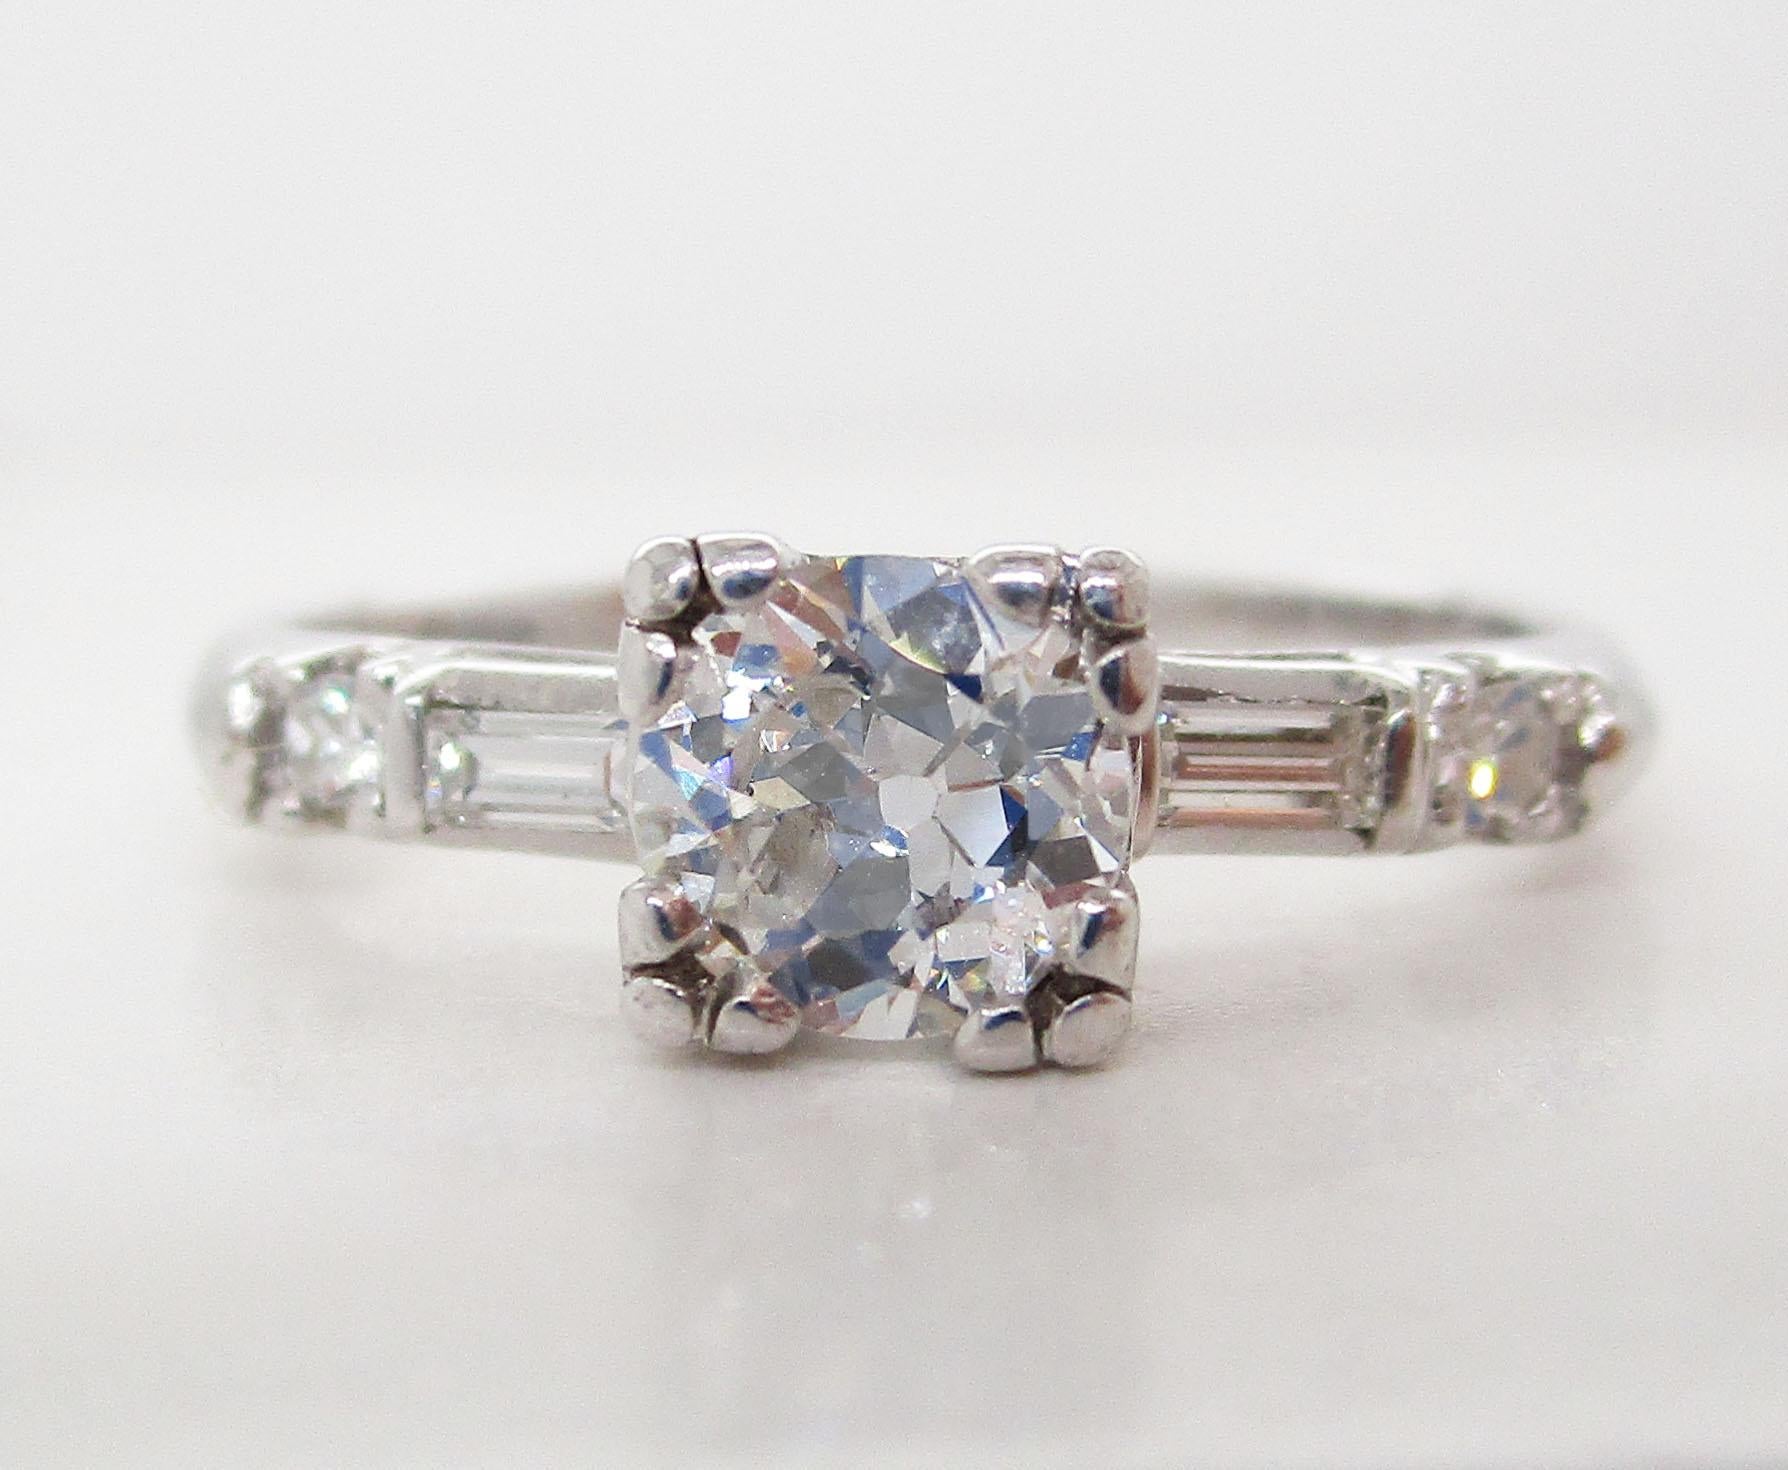 This is a gorgeous classic platinum diamond engagement ring. The ring features an absolutely stunning Old European cut diamond center that is flanked by a baguette diamond and a round diamond on each shoulder. The diamonds are almost perfectly